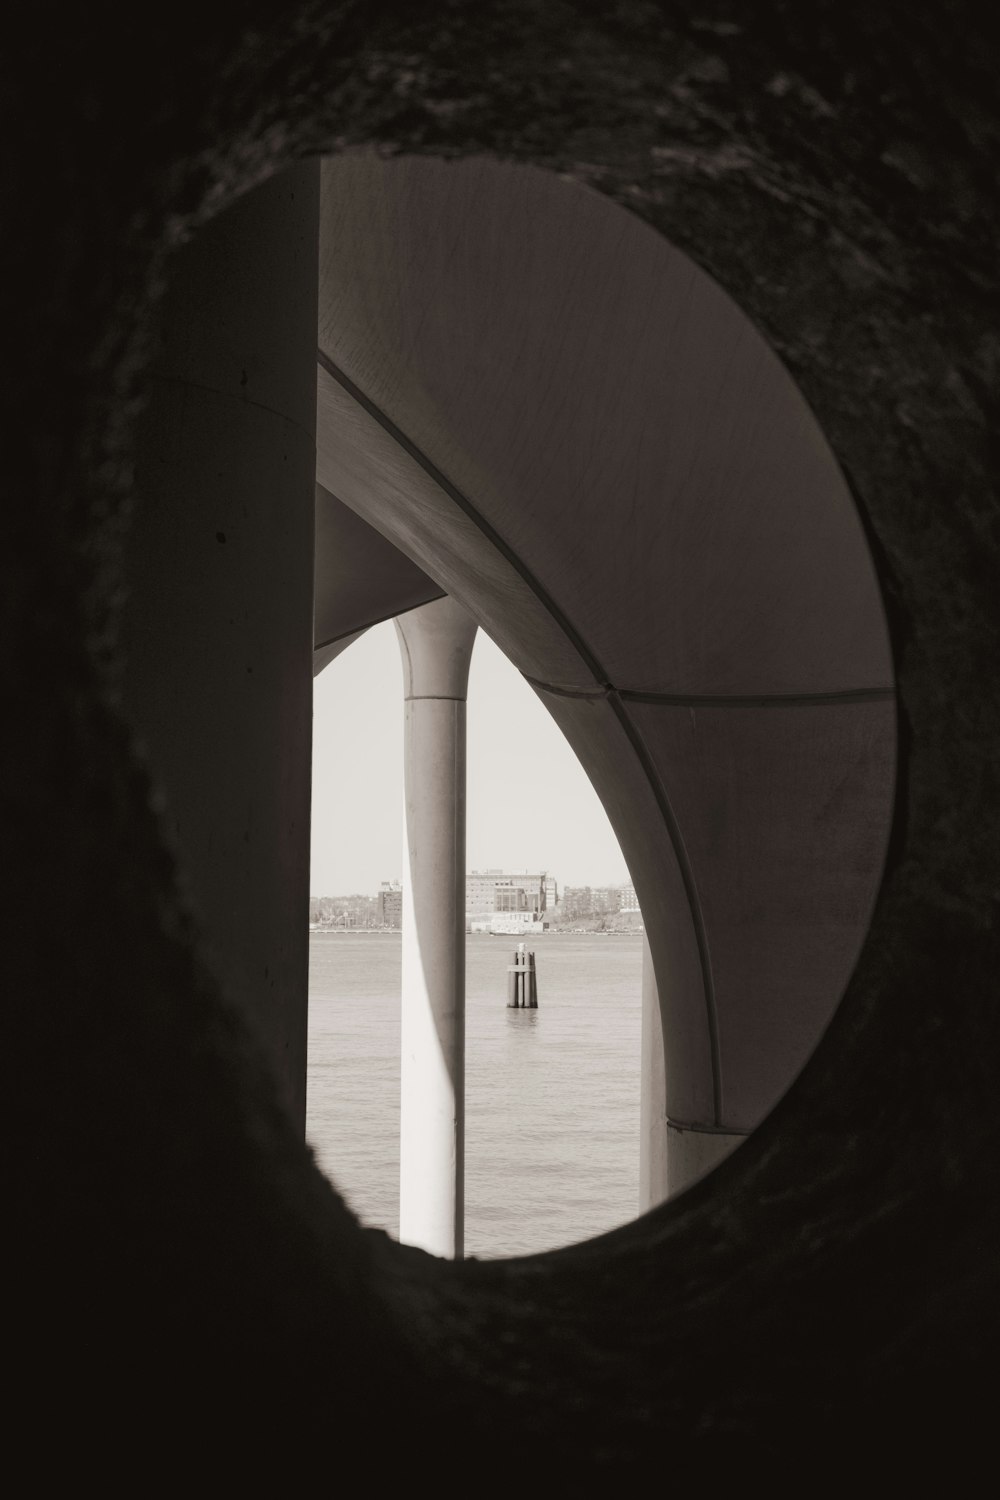 a view of a body of water through a tunnel